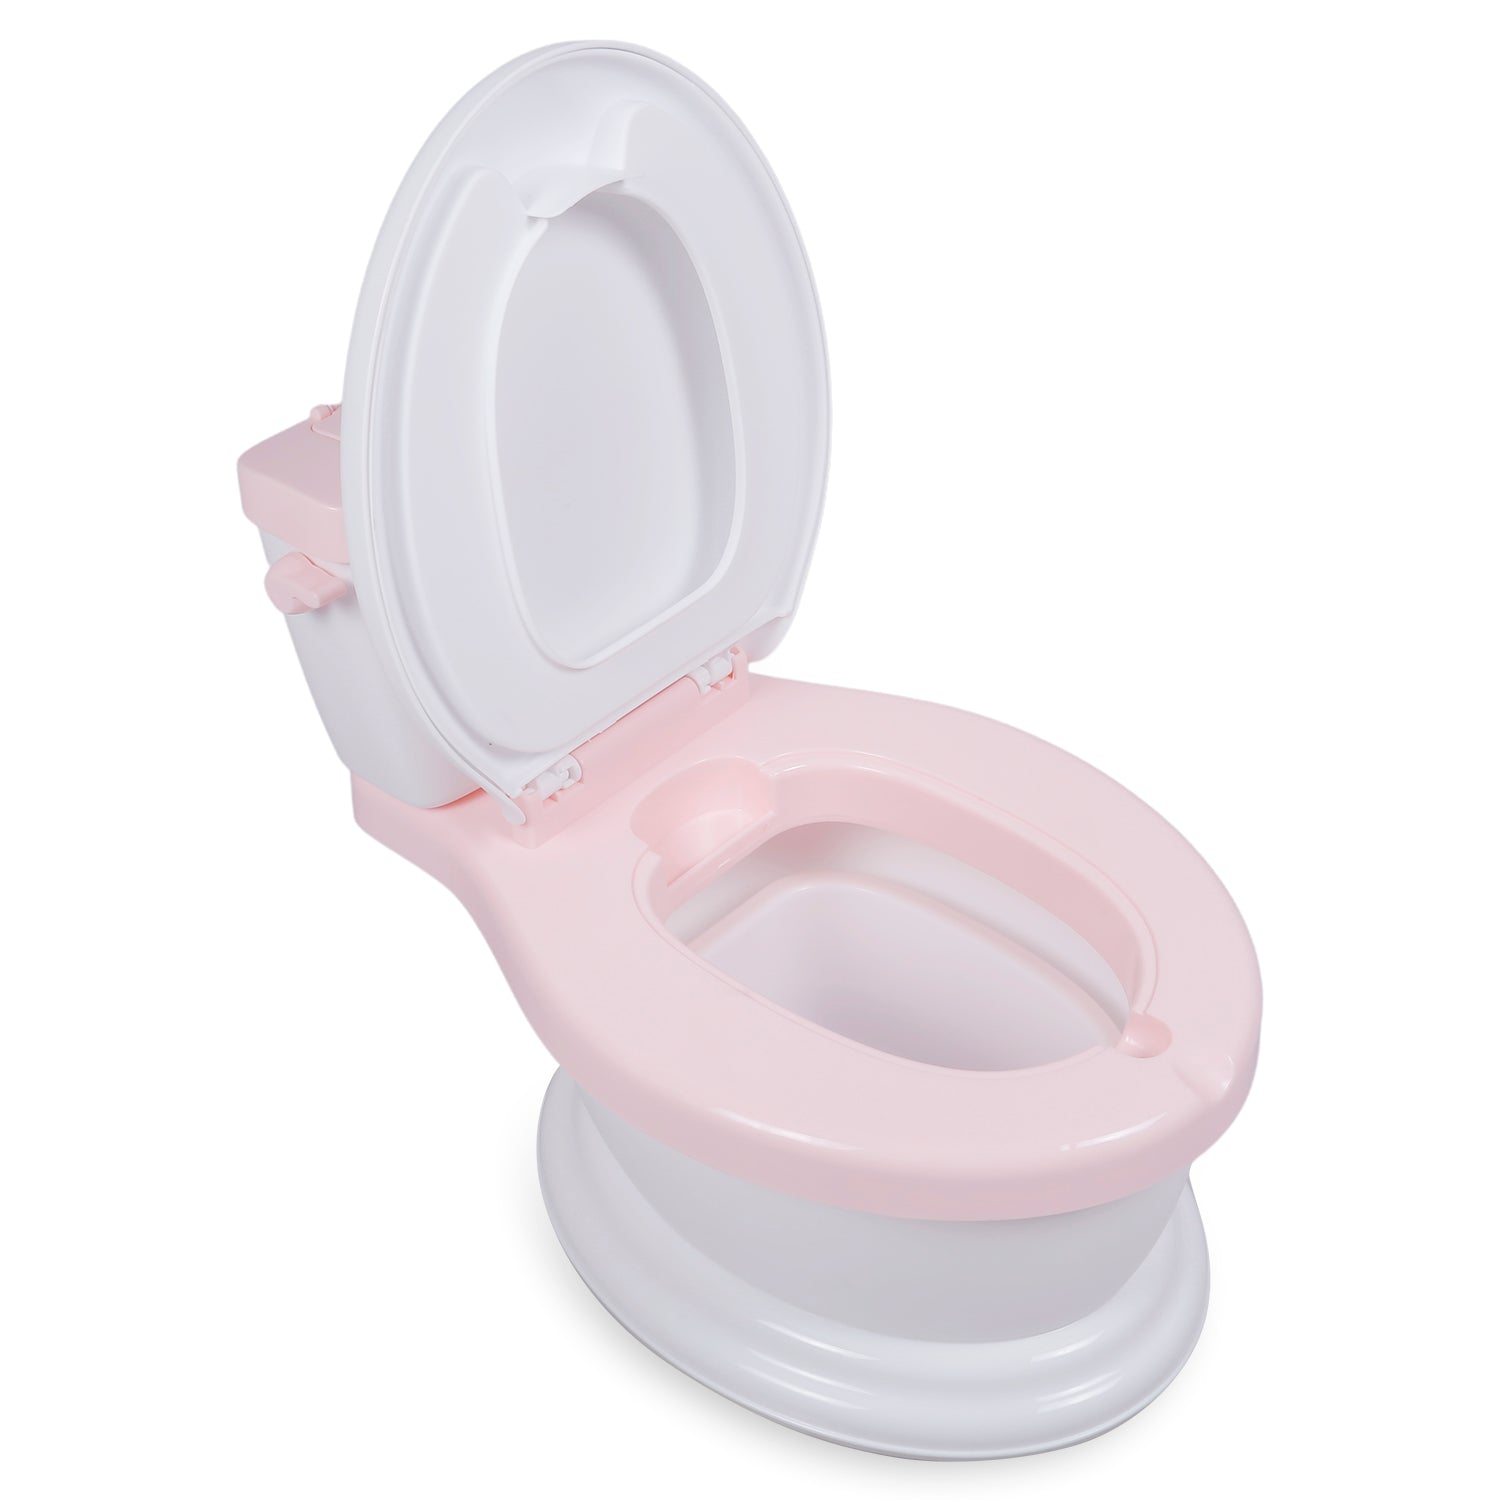 Toilet Training Potty Chair Realistic Western Style Pink - Baby Moo